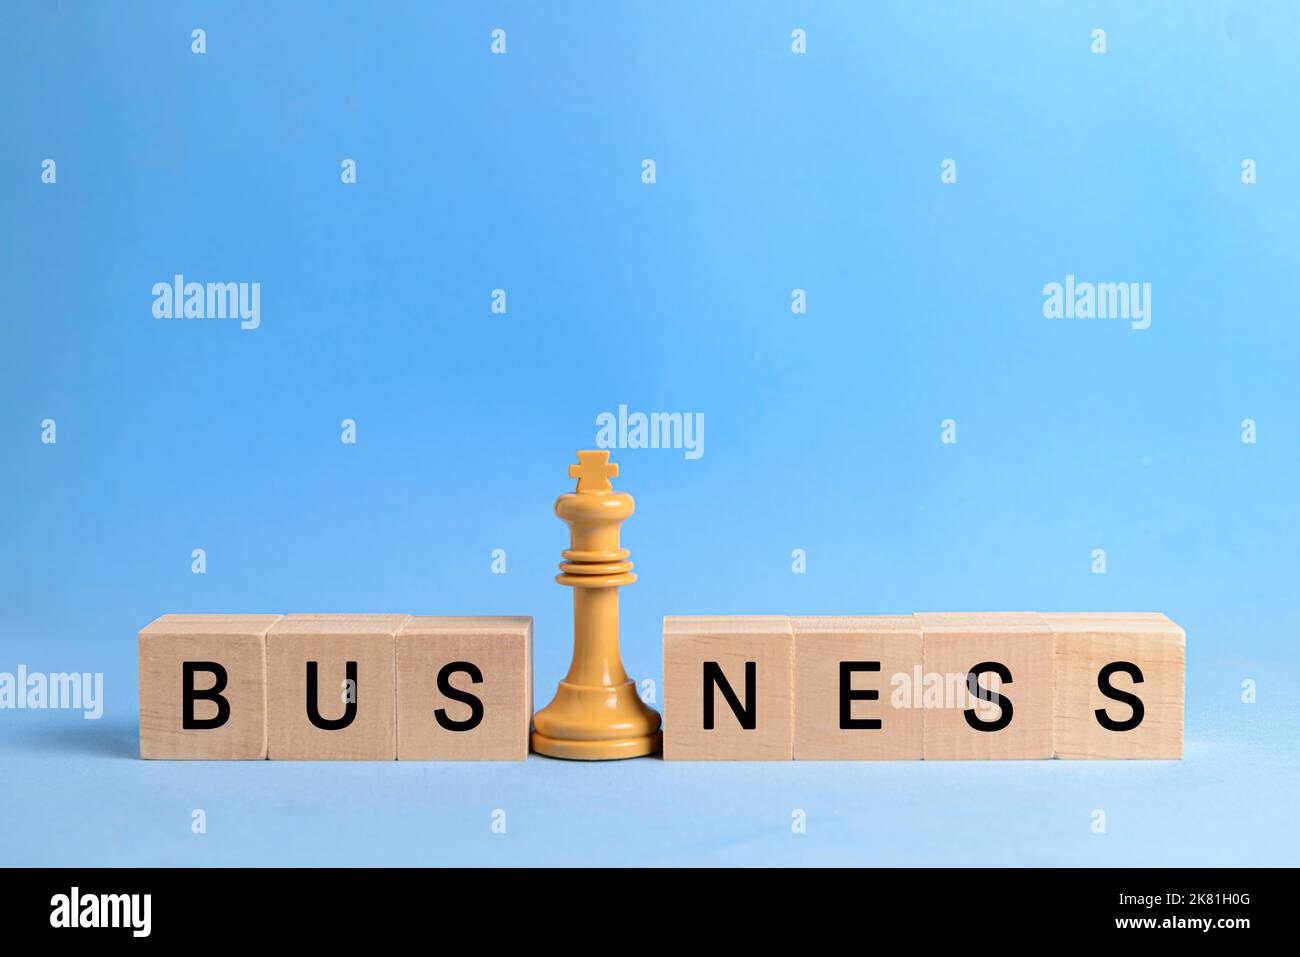 White chess king next to wooden blocks forming the word 'business', on blue background. Image to illustrate the concept of leadership and business str Stock Photo